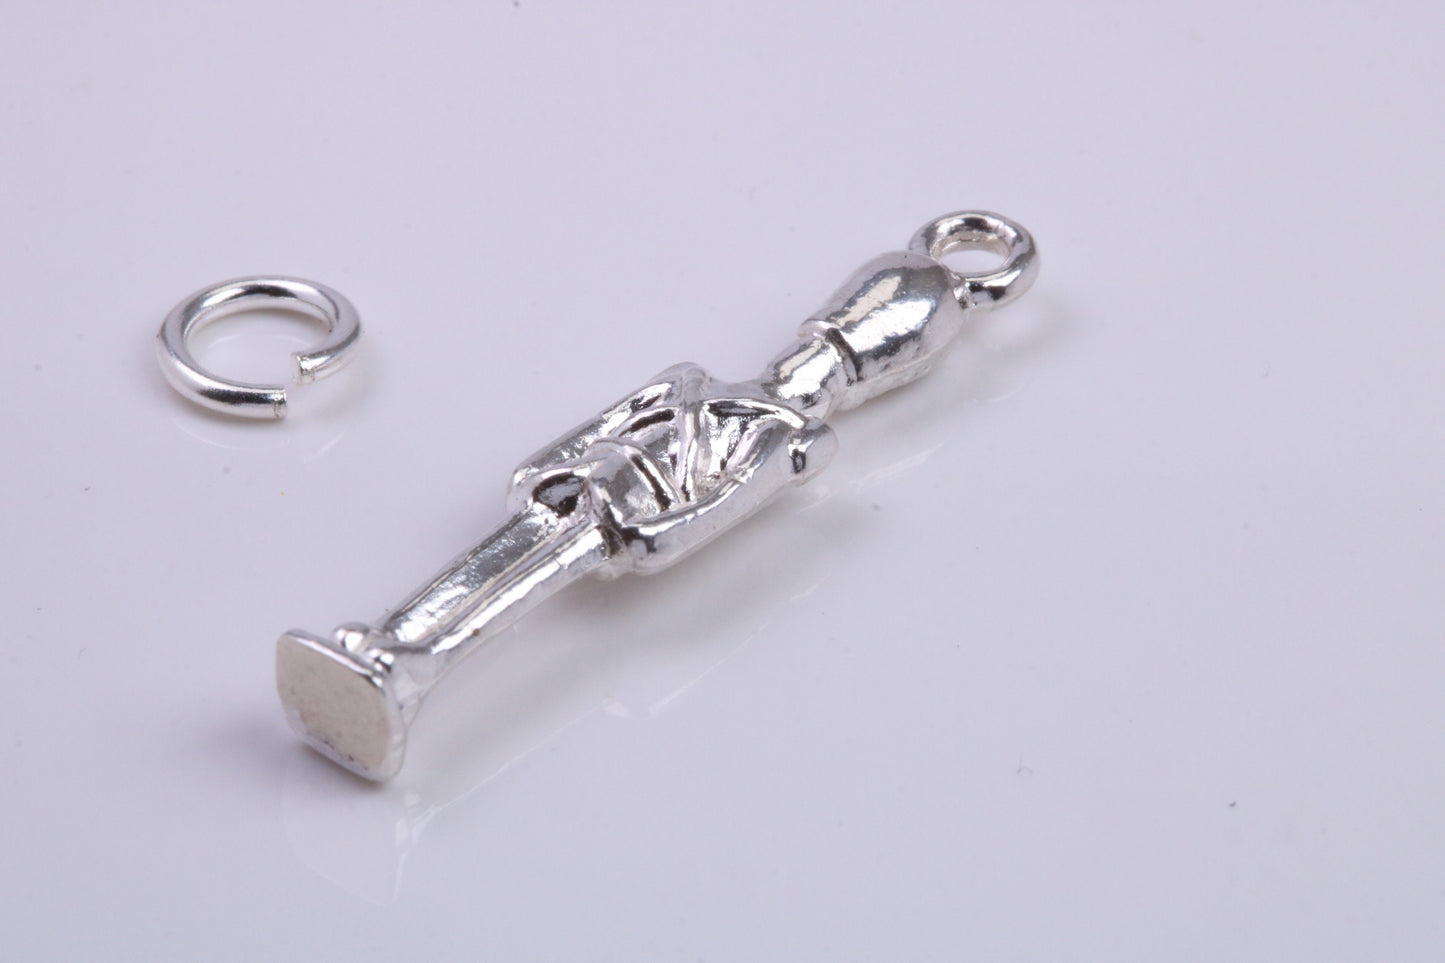 Queens Guard Charm, Traditional Charm, Made from Solid 925 Grade Sterling Silver, Complete with Attachment Link